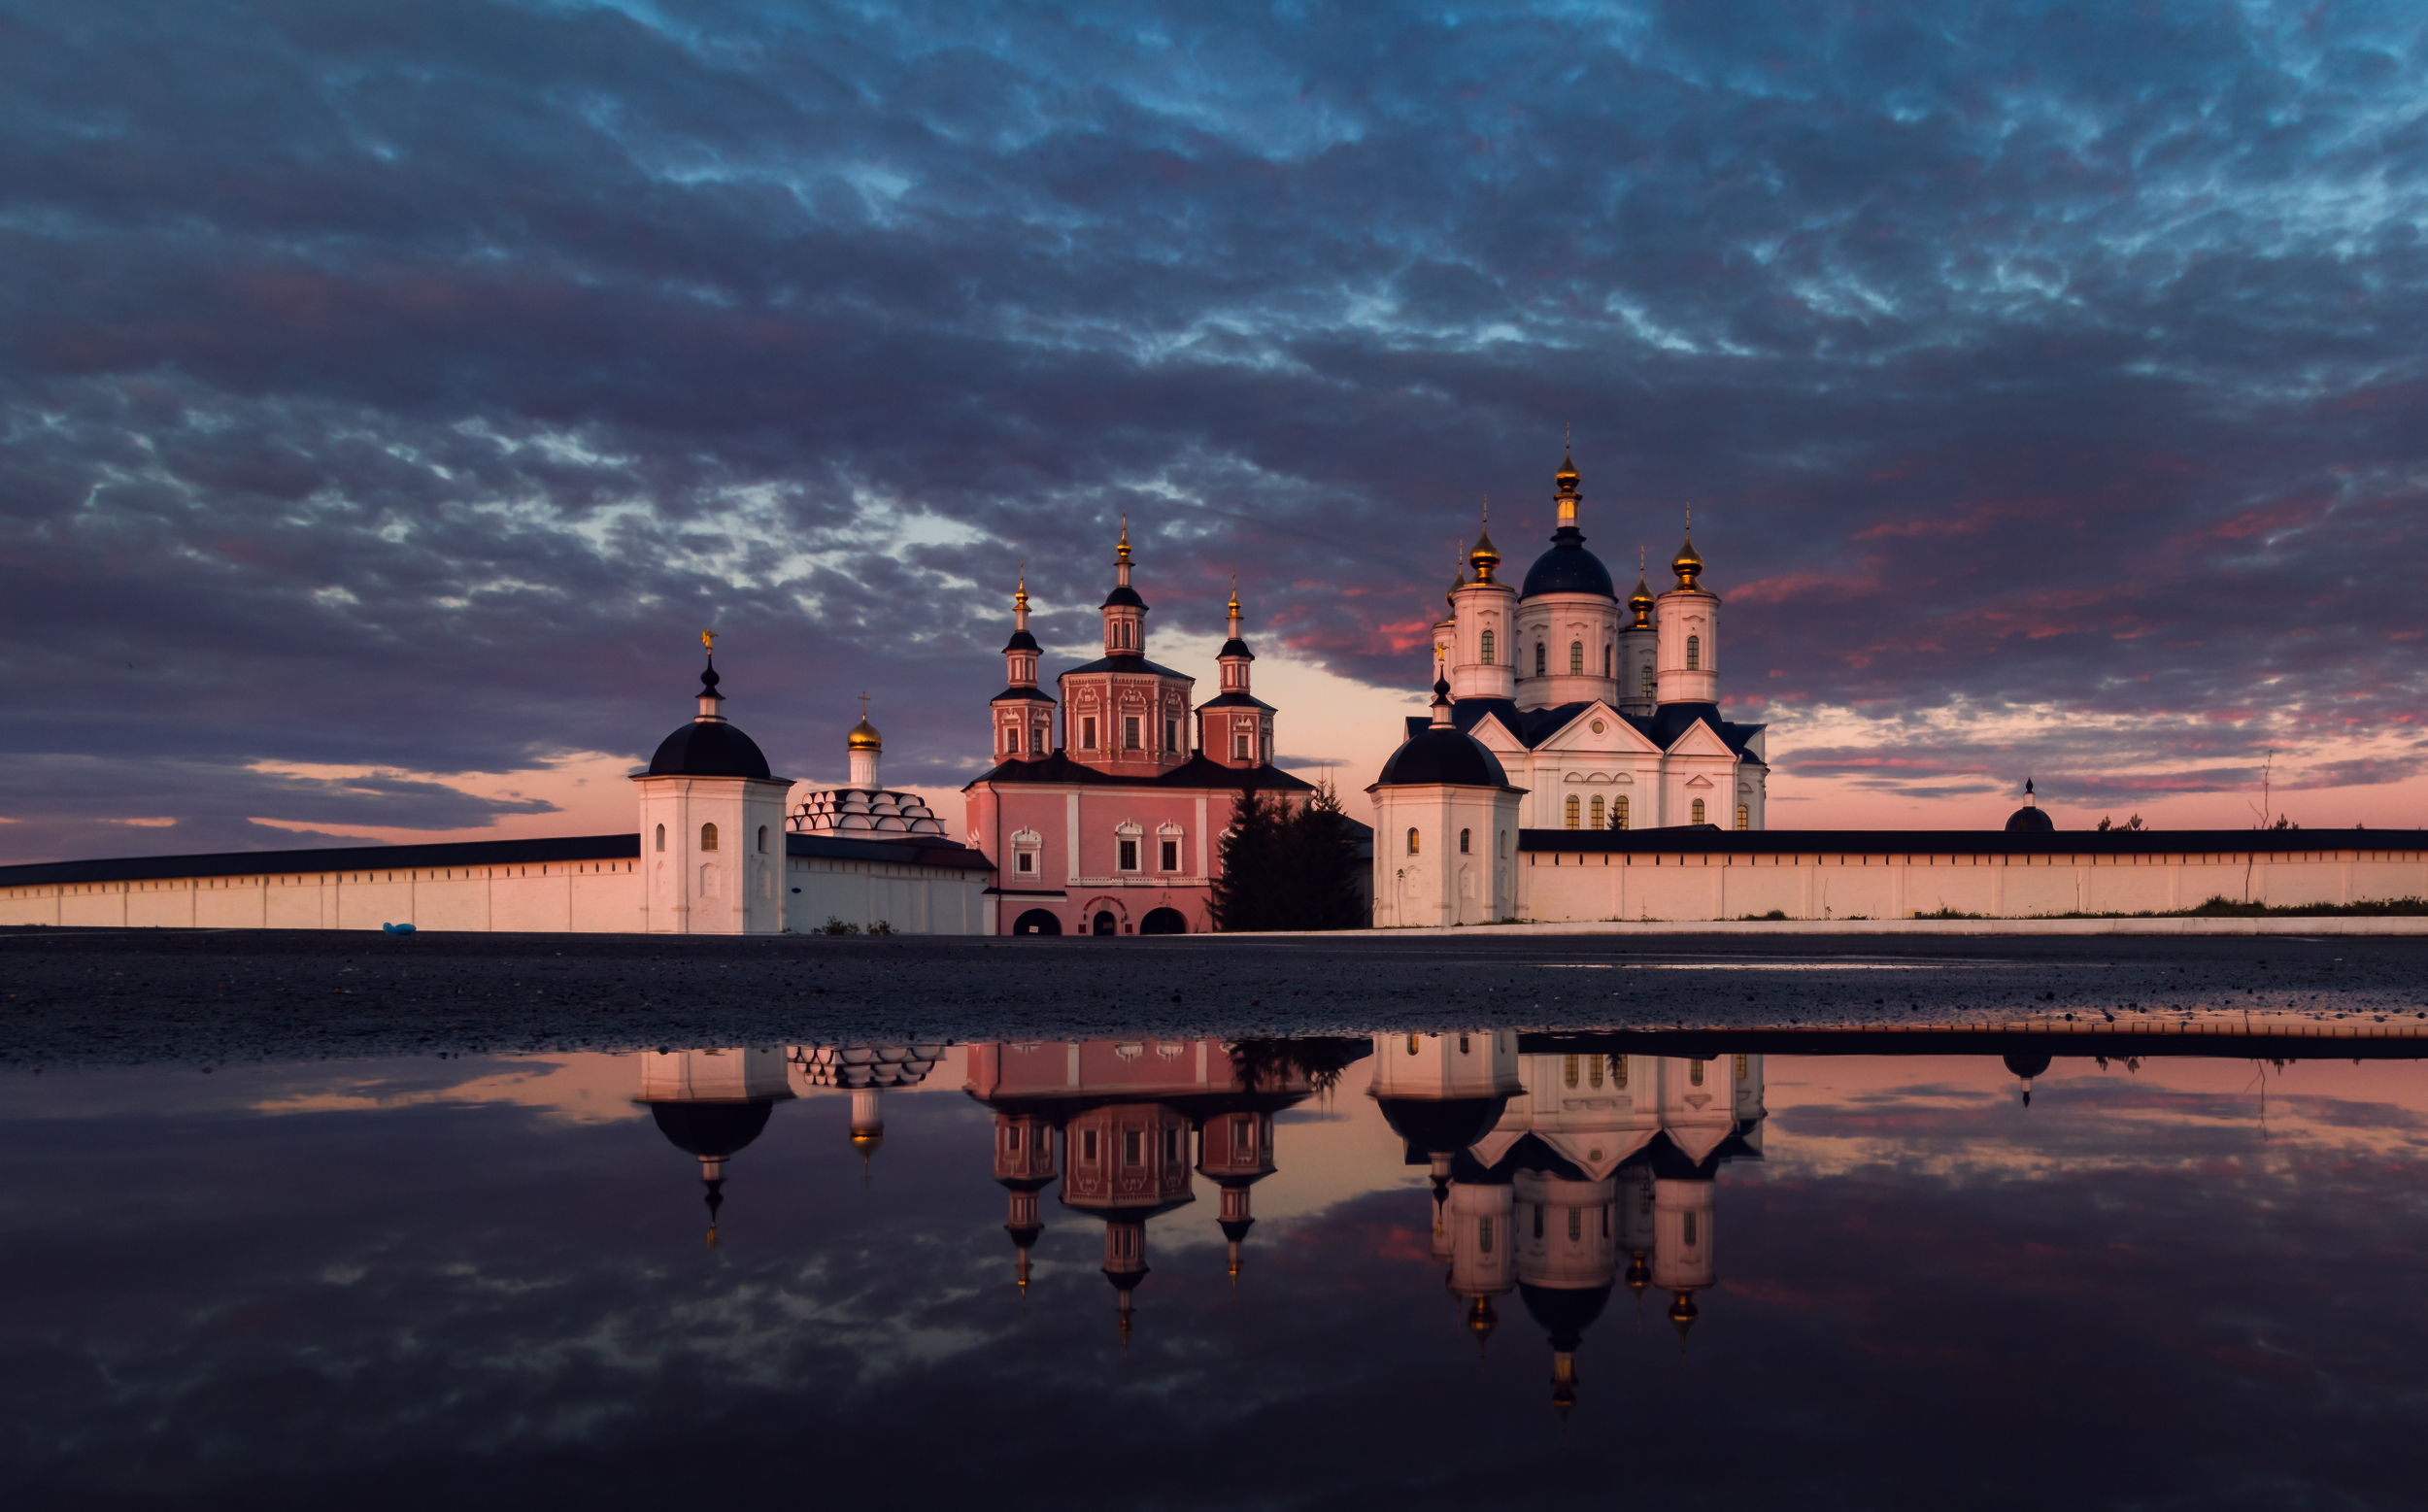 General 2500x1557 architecture building old building church water reflection clouds monastery Russia Orthodox